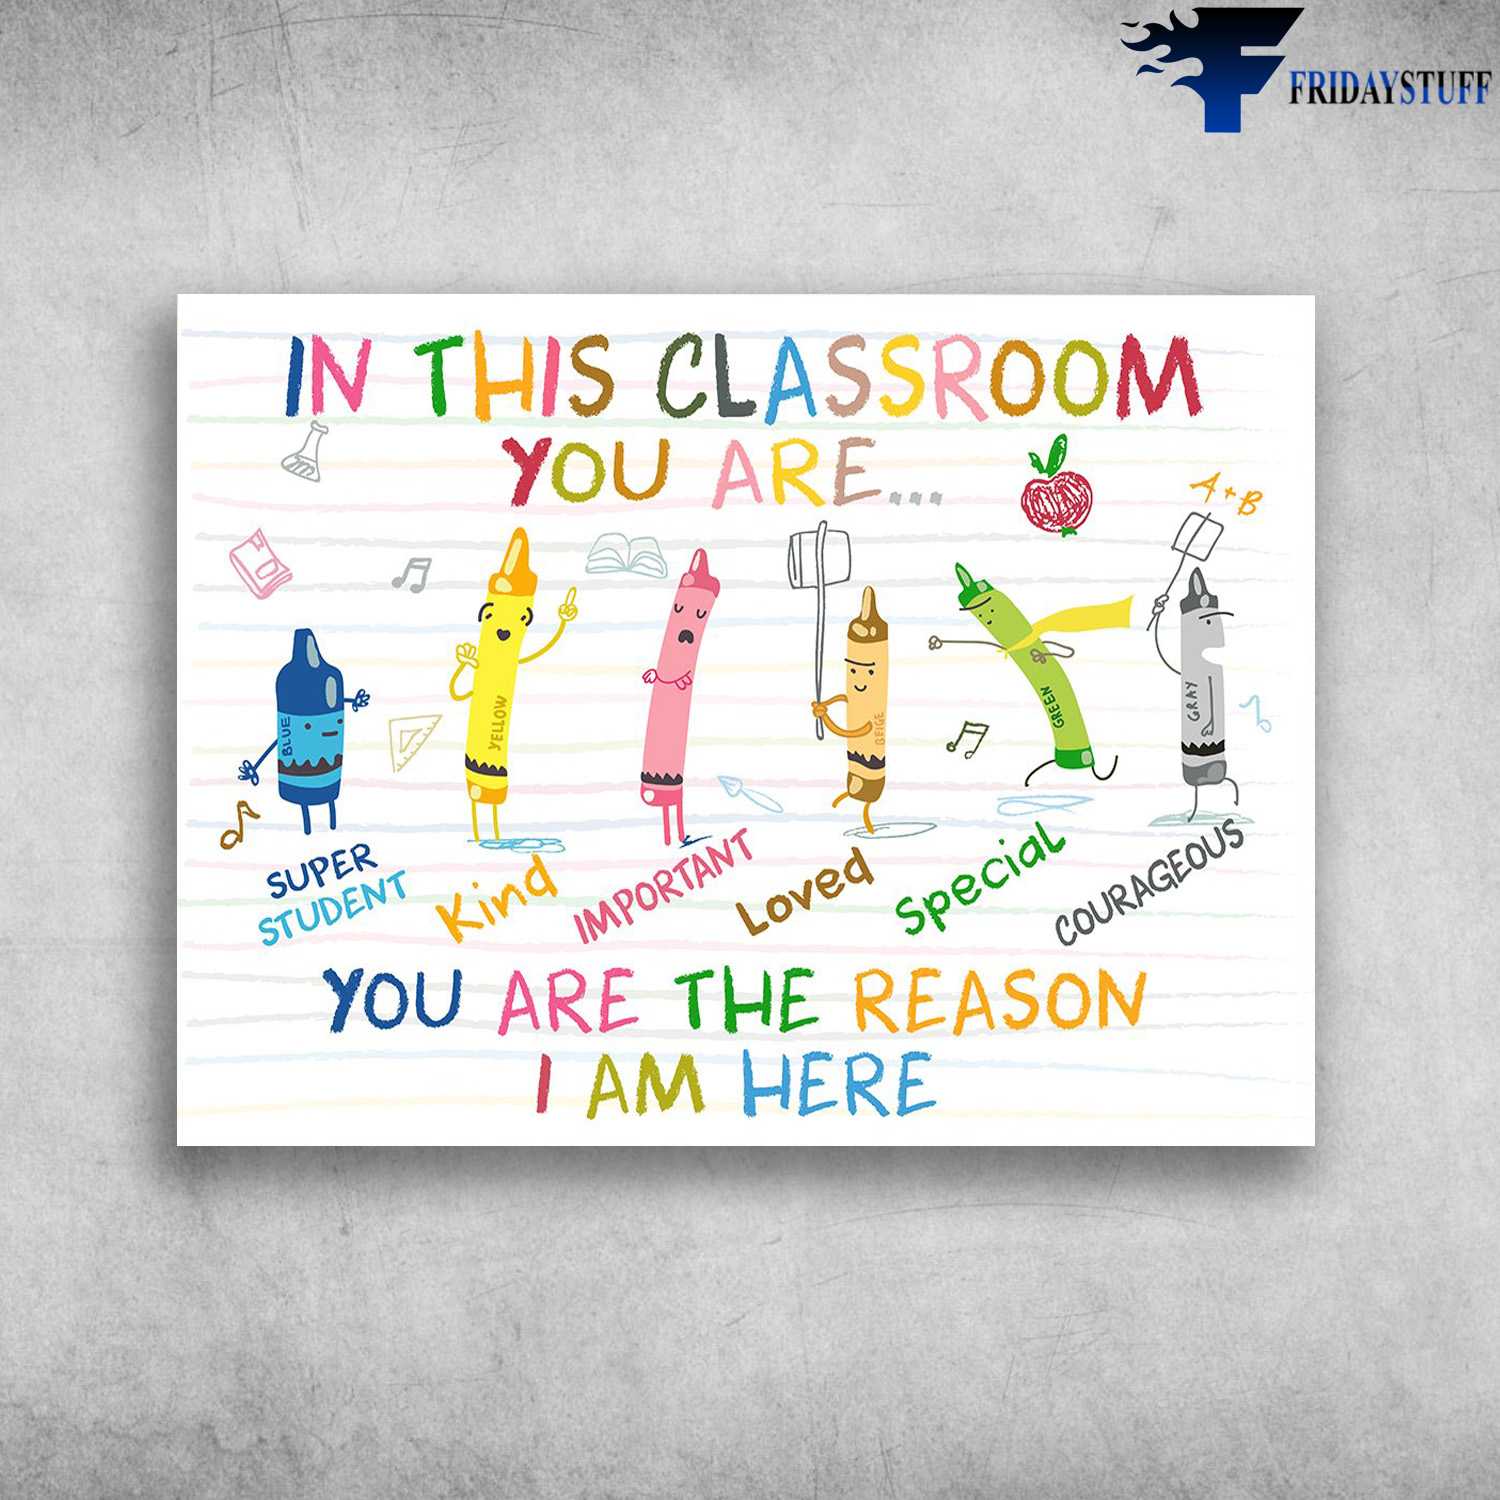 Back To School - In This Classroom, You Are Super Student, Kind, Important, Loved, Special, Courageous, You Are The Reason I Am Here